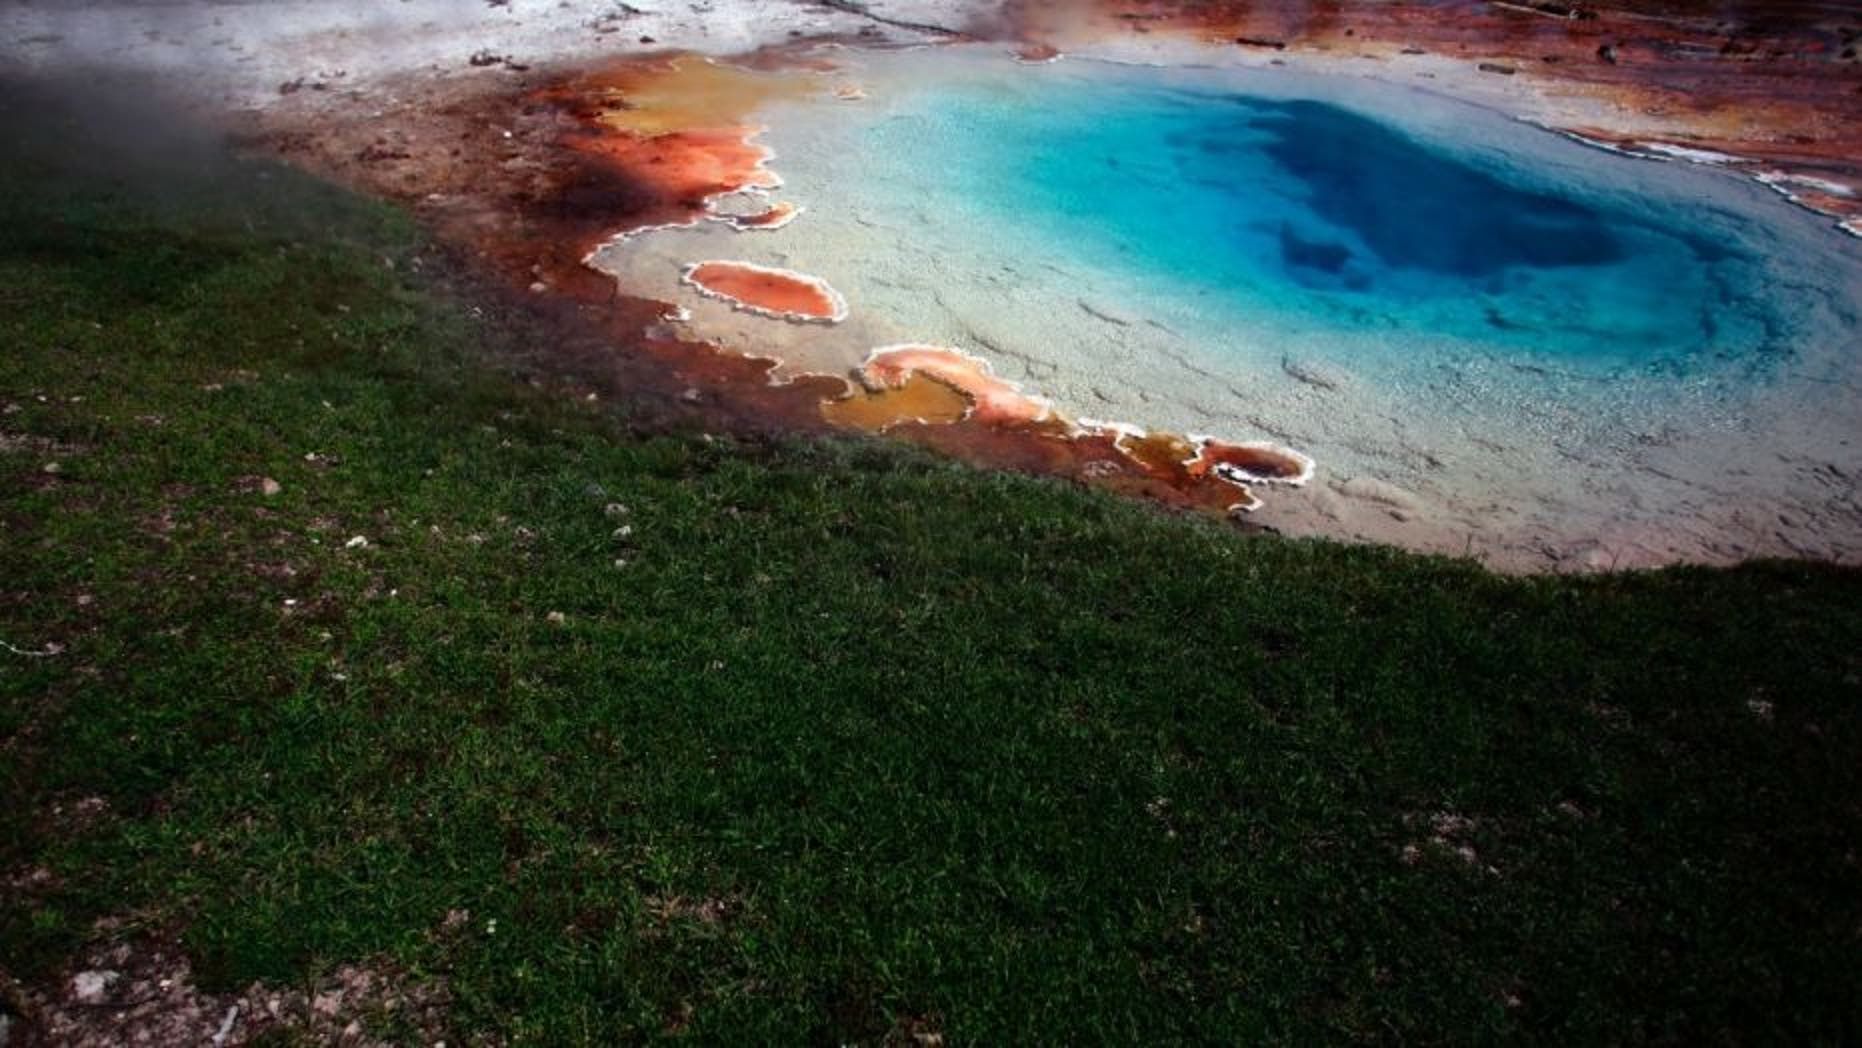 The Silex source in the Fountain Paint Pot area in Yellowstone National Park, Wyoming.